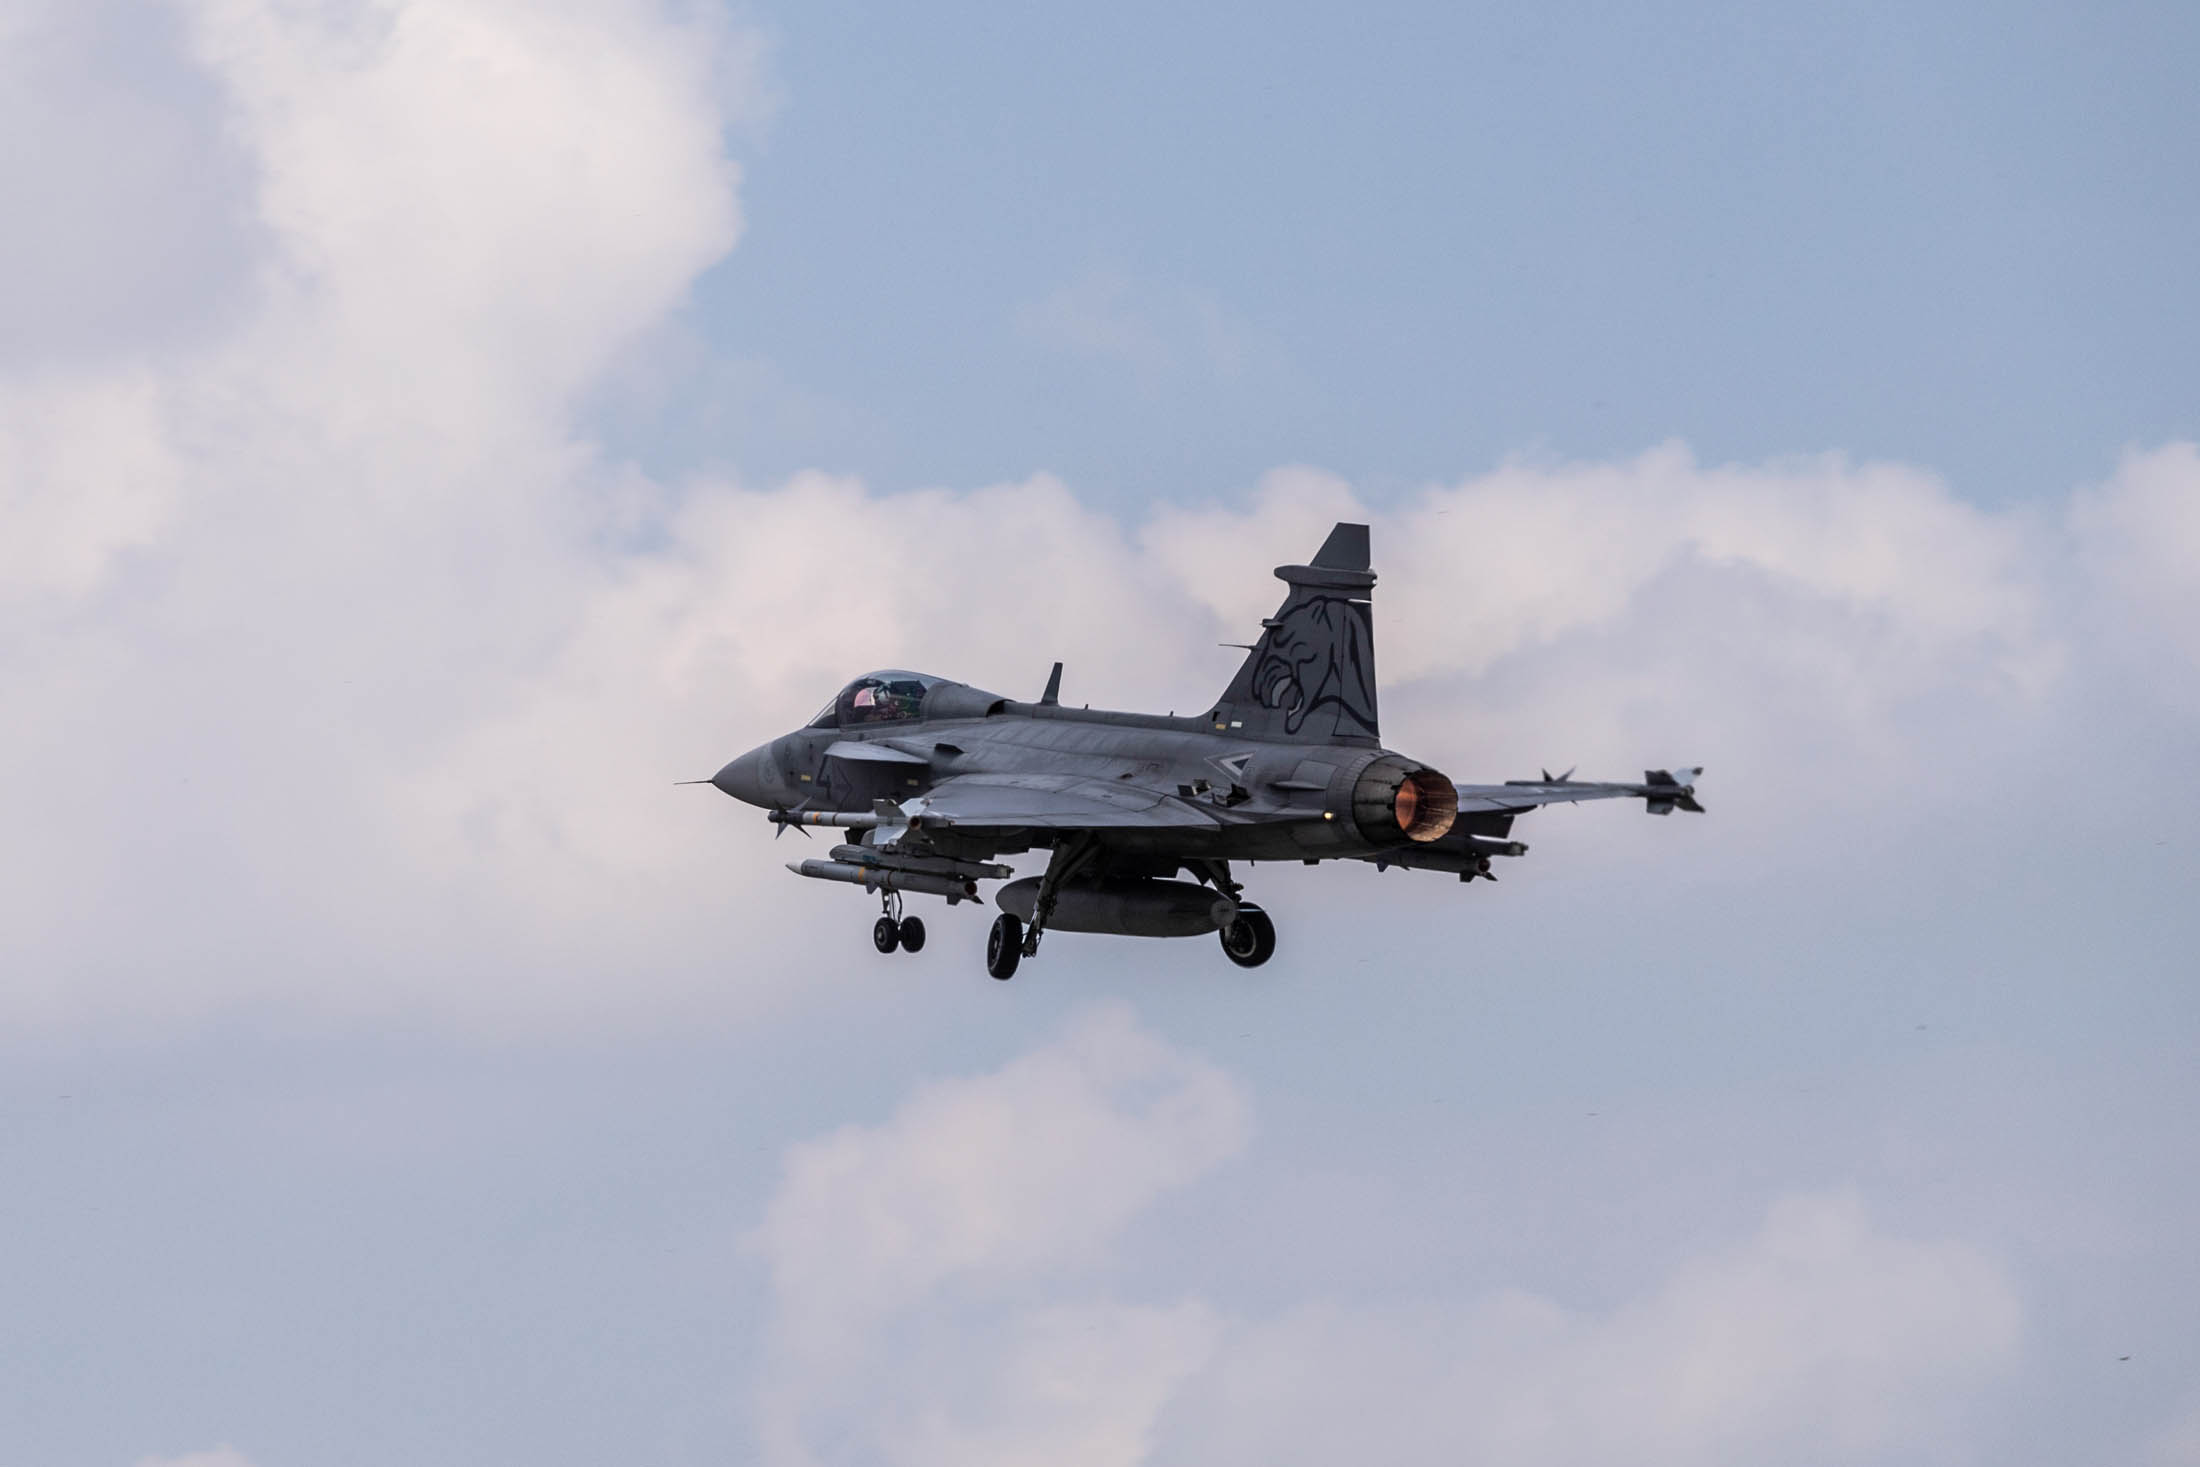 Hungarian Air Force JAS 39 Gripen launches for air policing mission. Photo: NATO